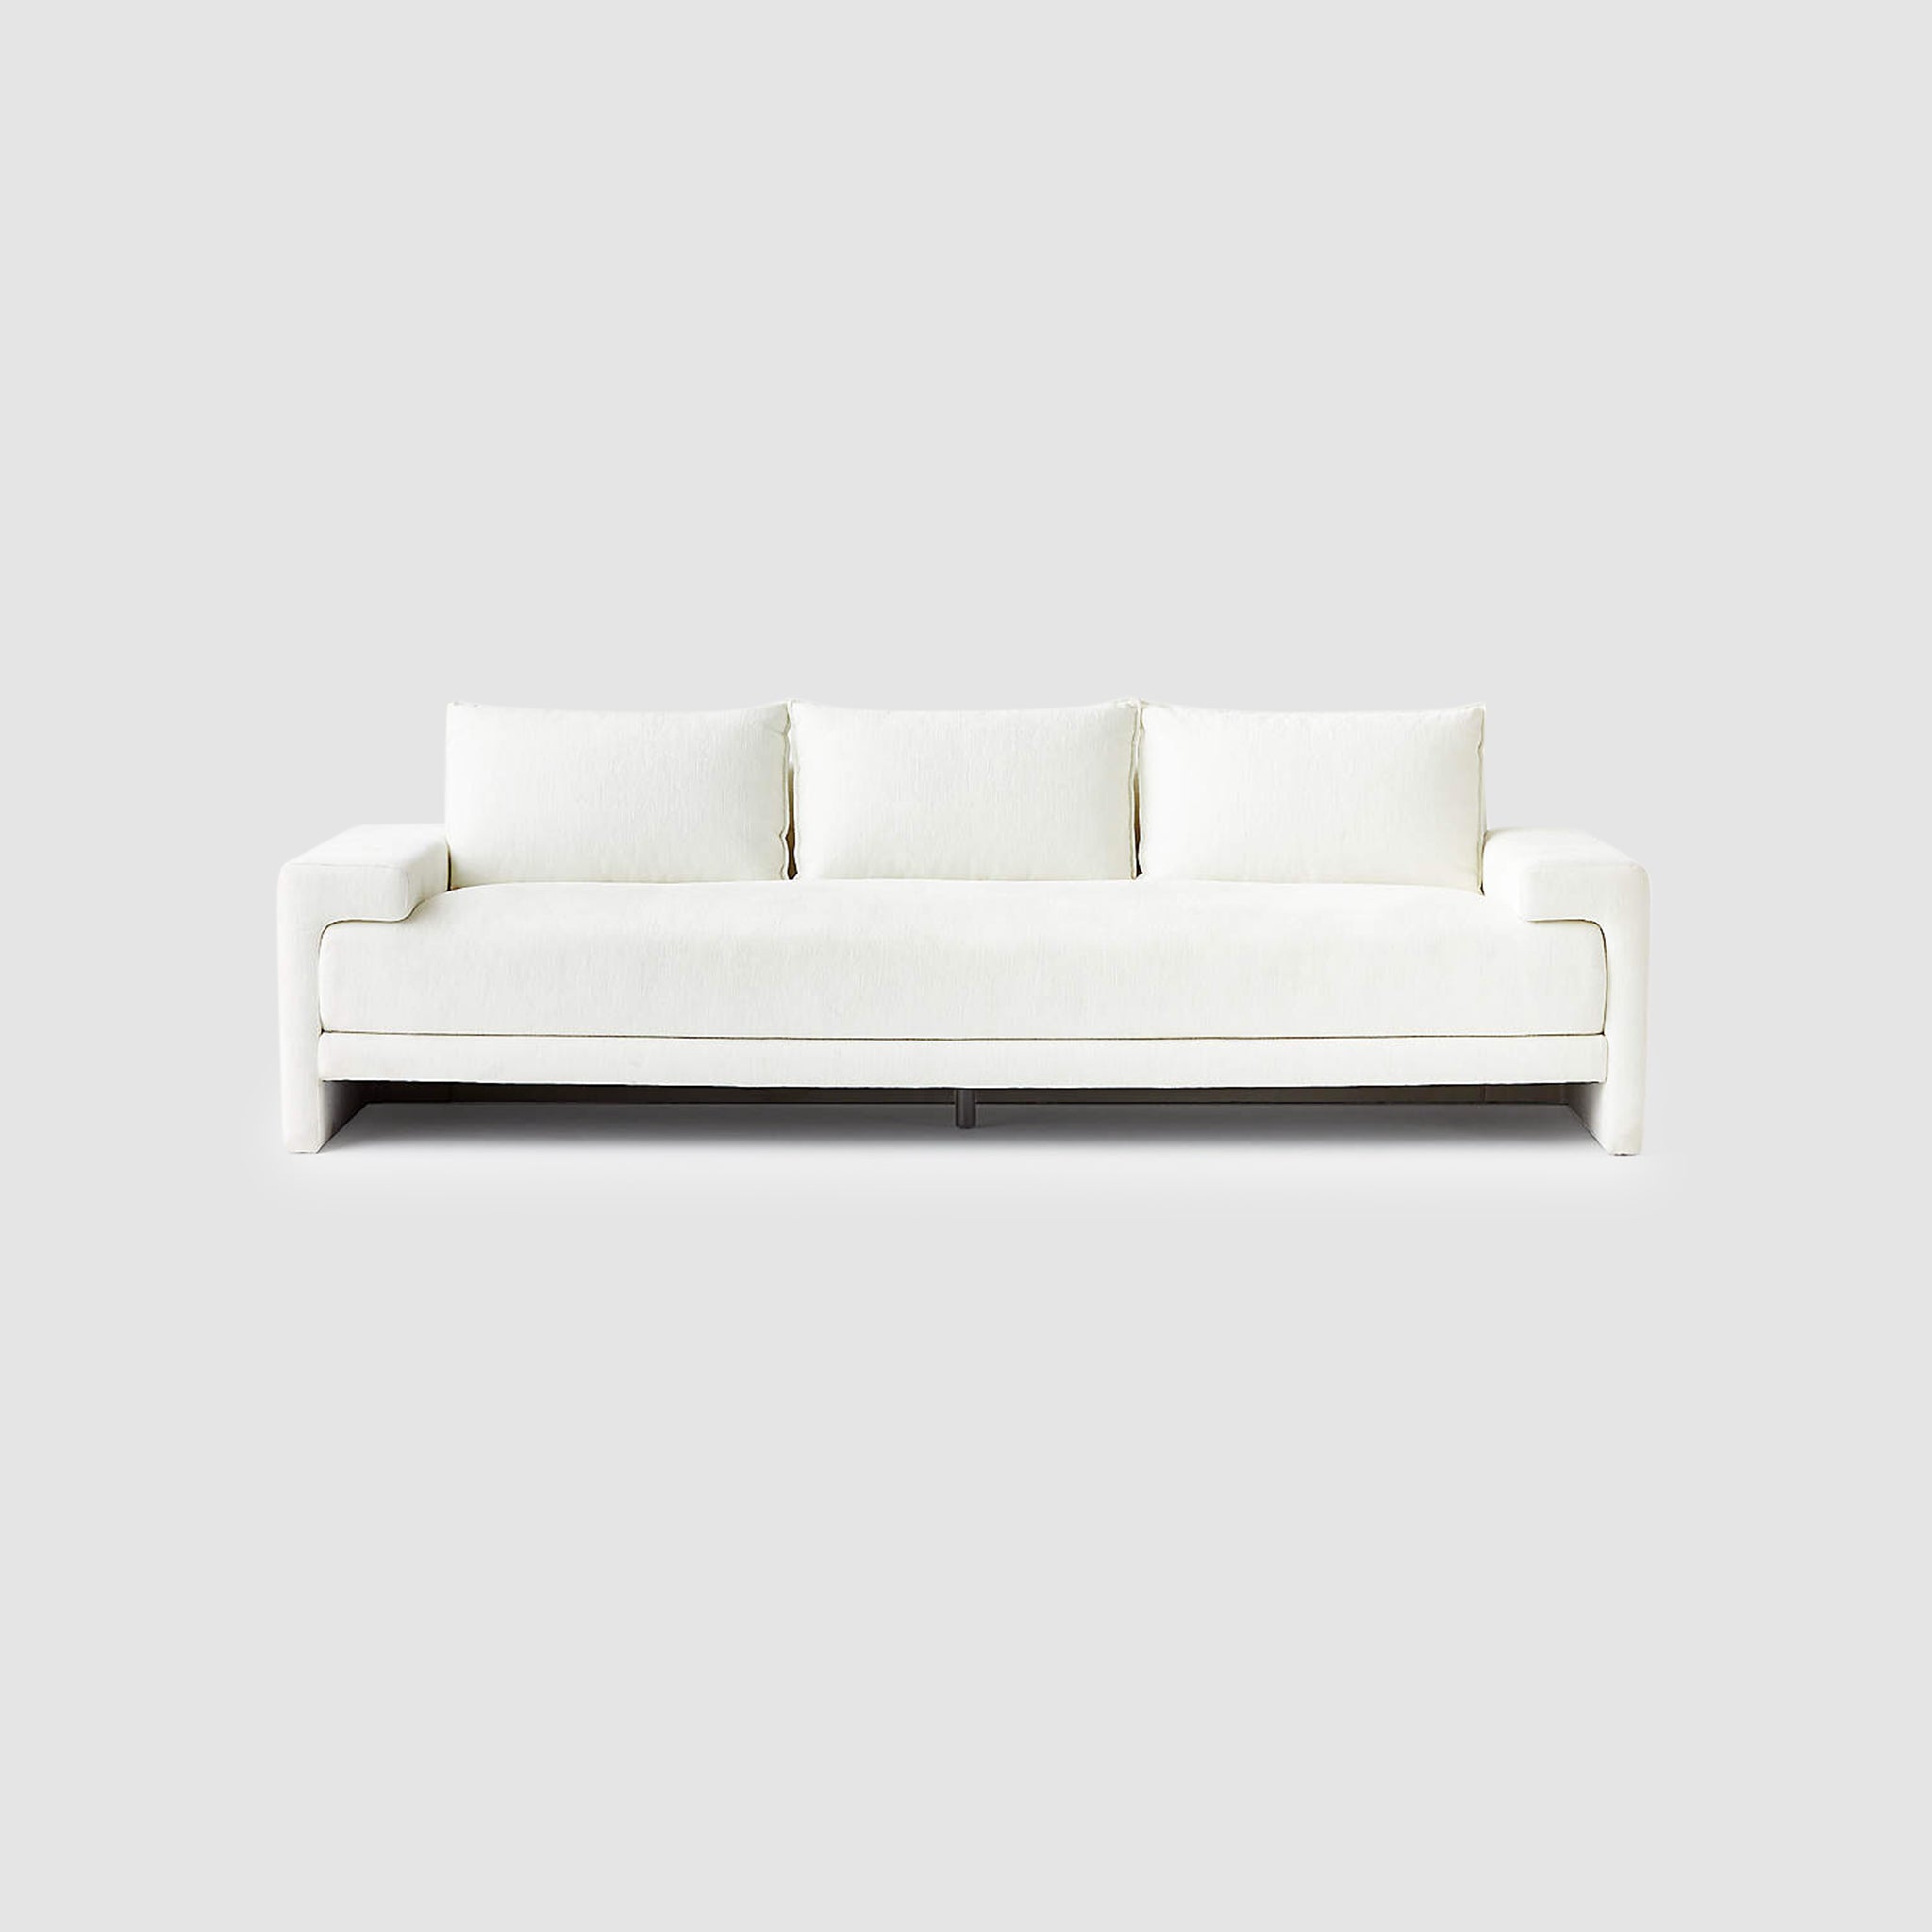 Modern white sofa with clean lines and plush cushions, front view - perfect for contemporary living rooms and minimalist interior design.